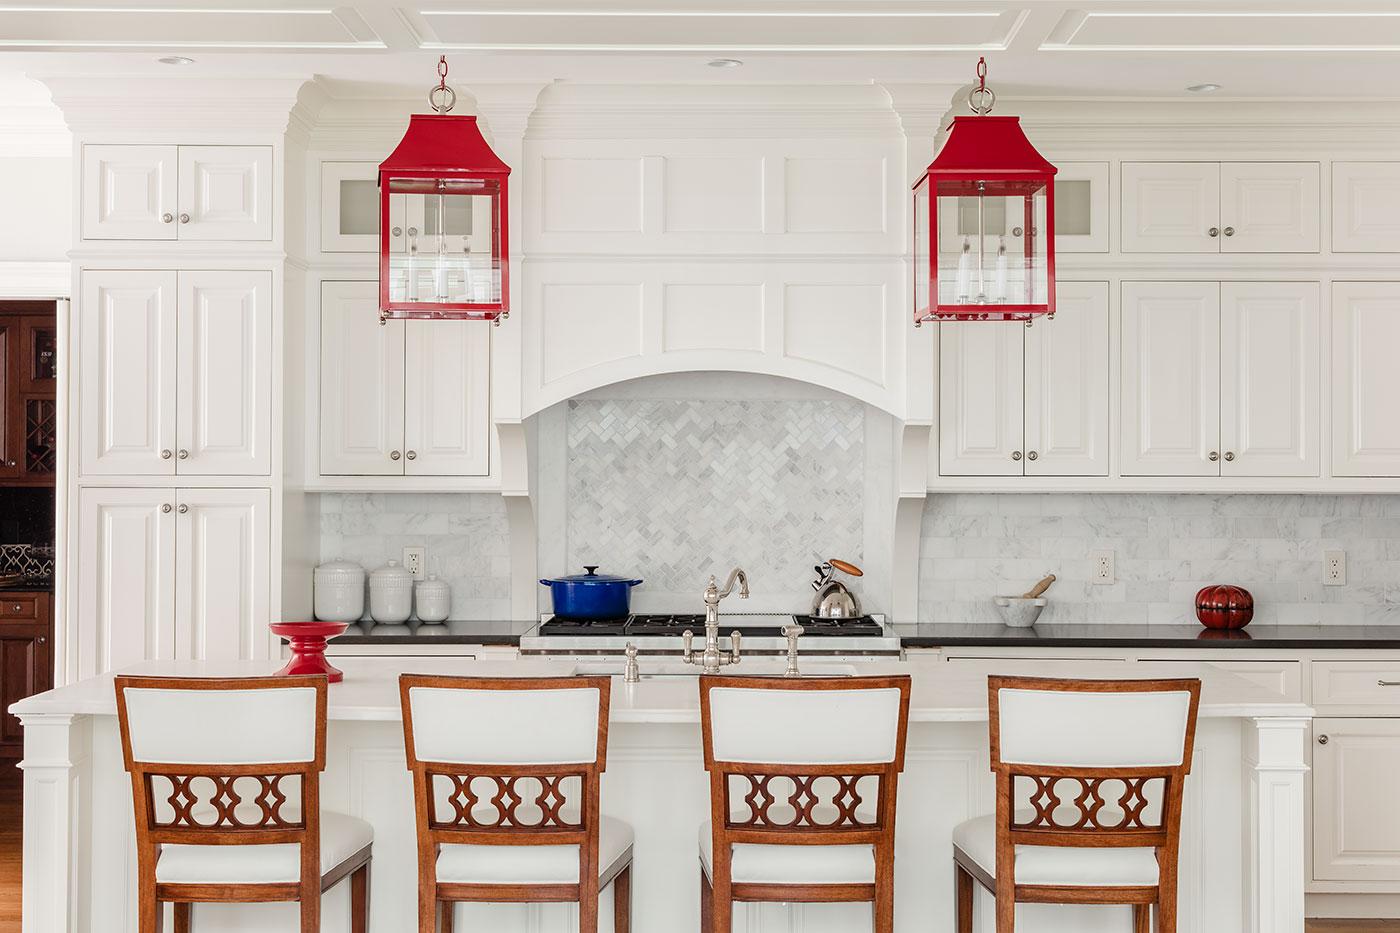 High-end red, white and blue kitchen design by Carter & Company Interior Design